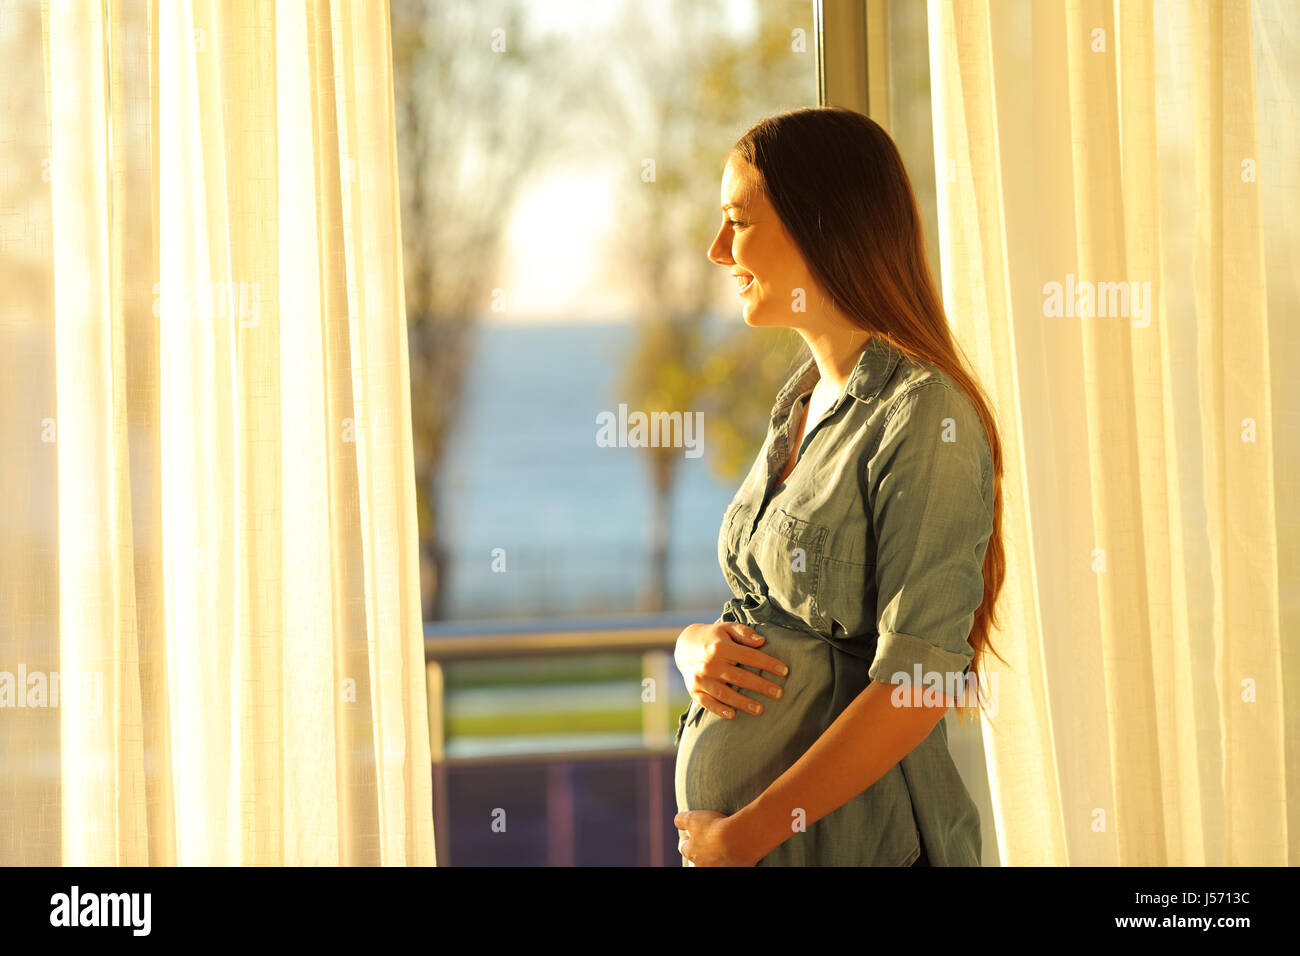 Side view of a pregnant woman looking outdoors through a window at sunset with a warmth light Stock Photo